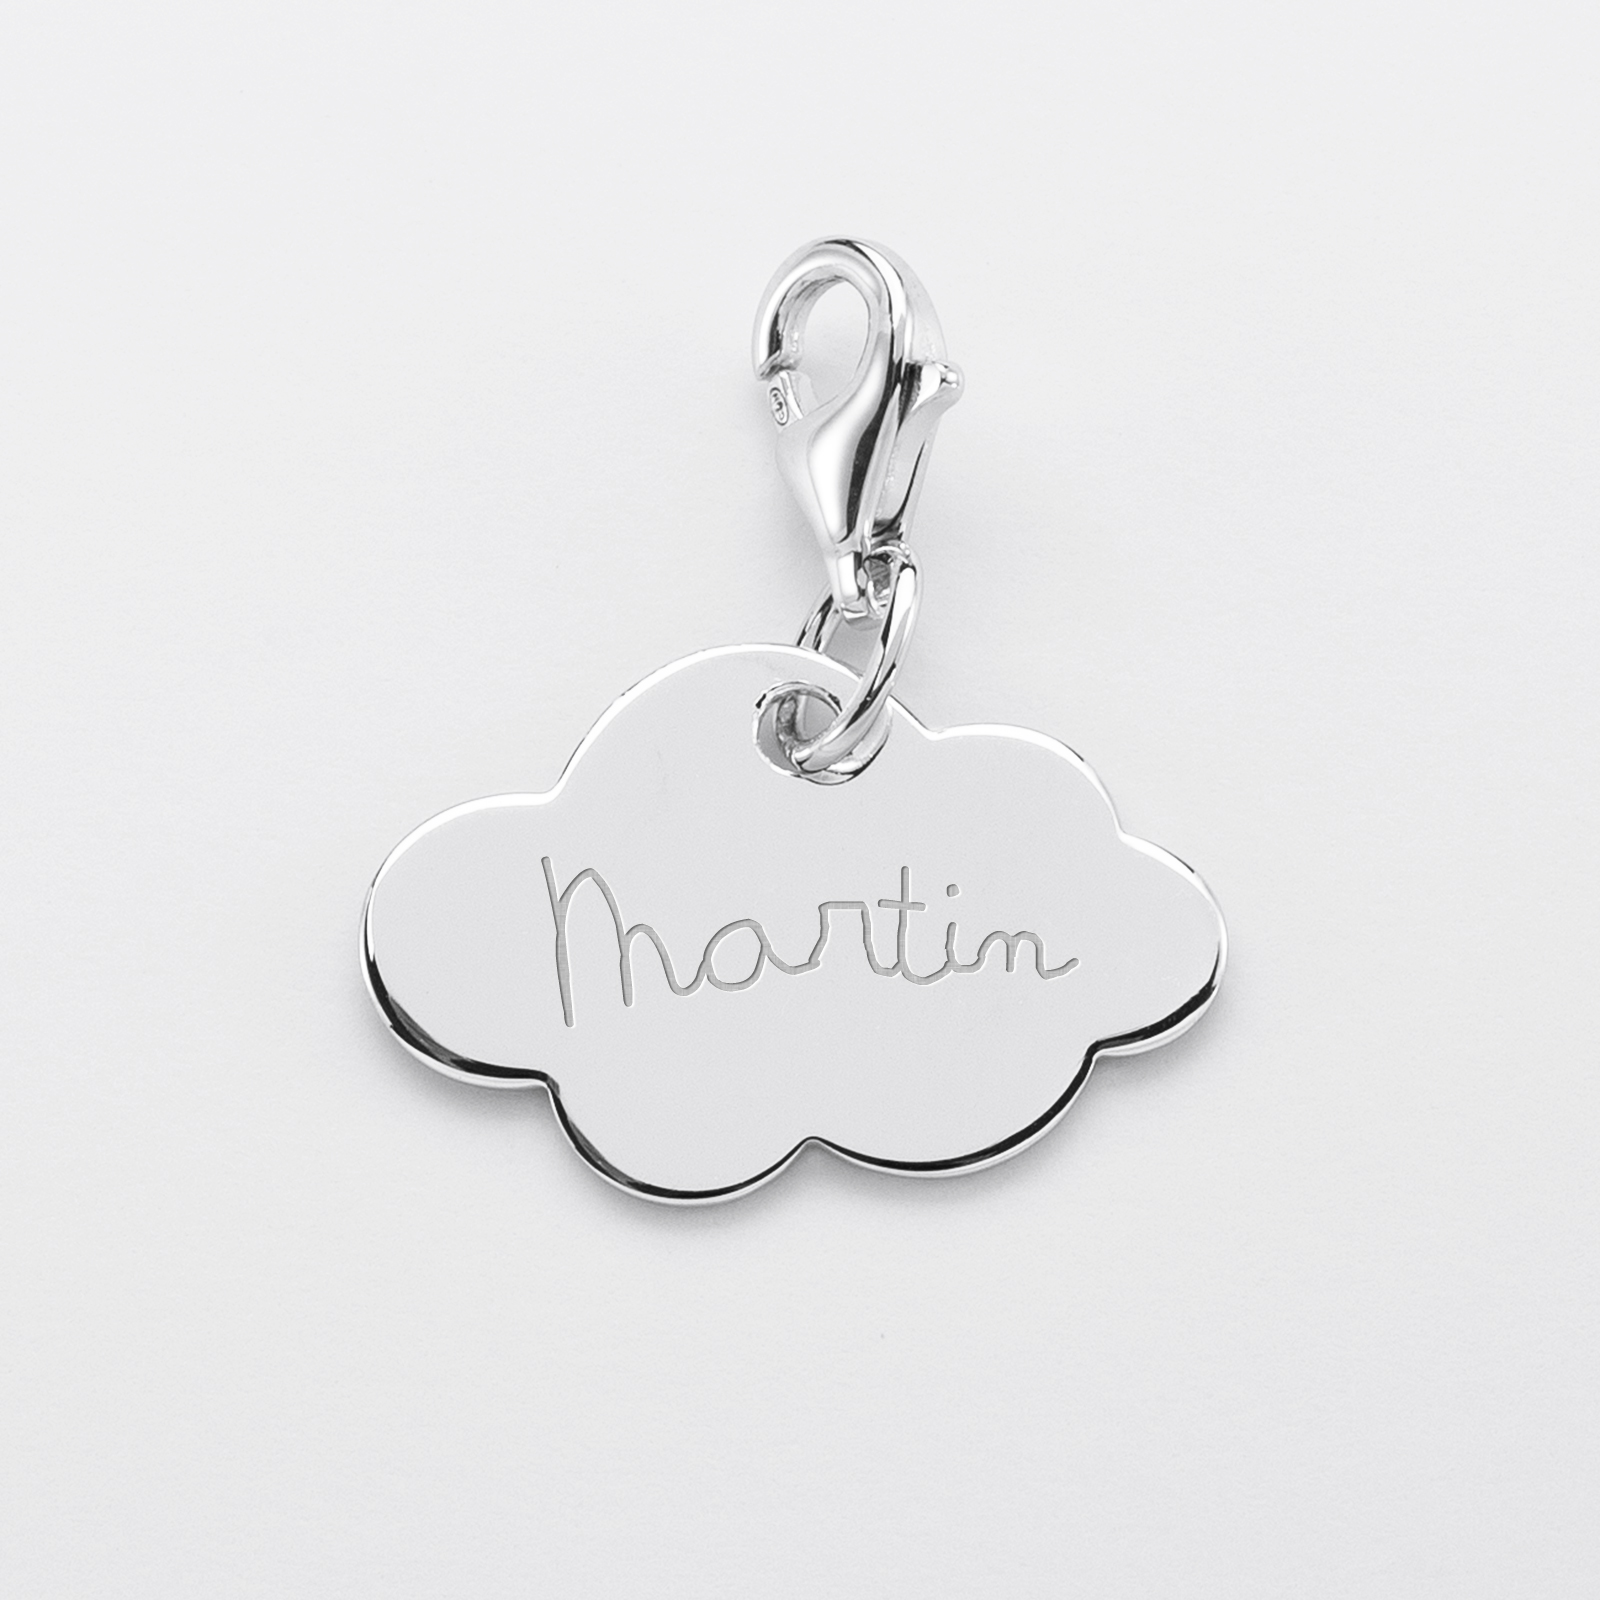 Engraved silver cloud charm 20x14mm - name